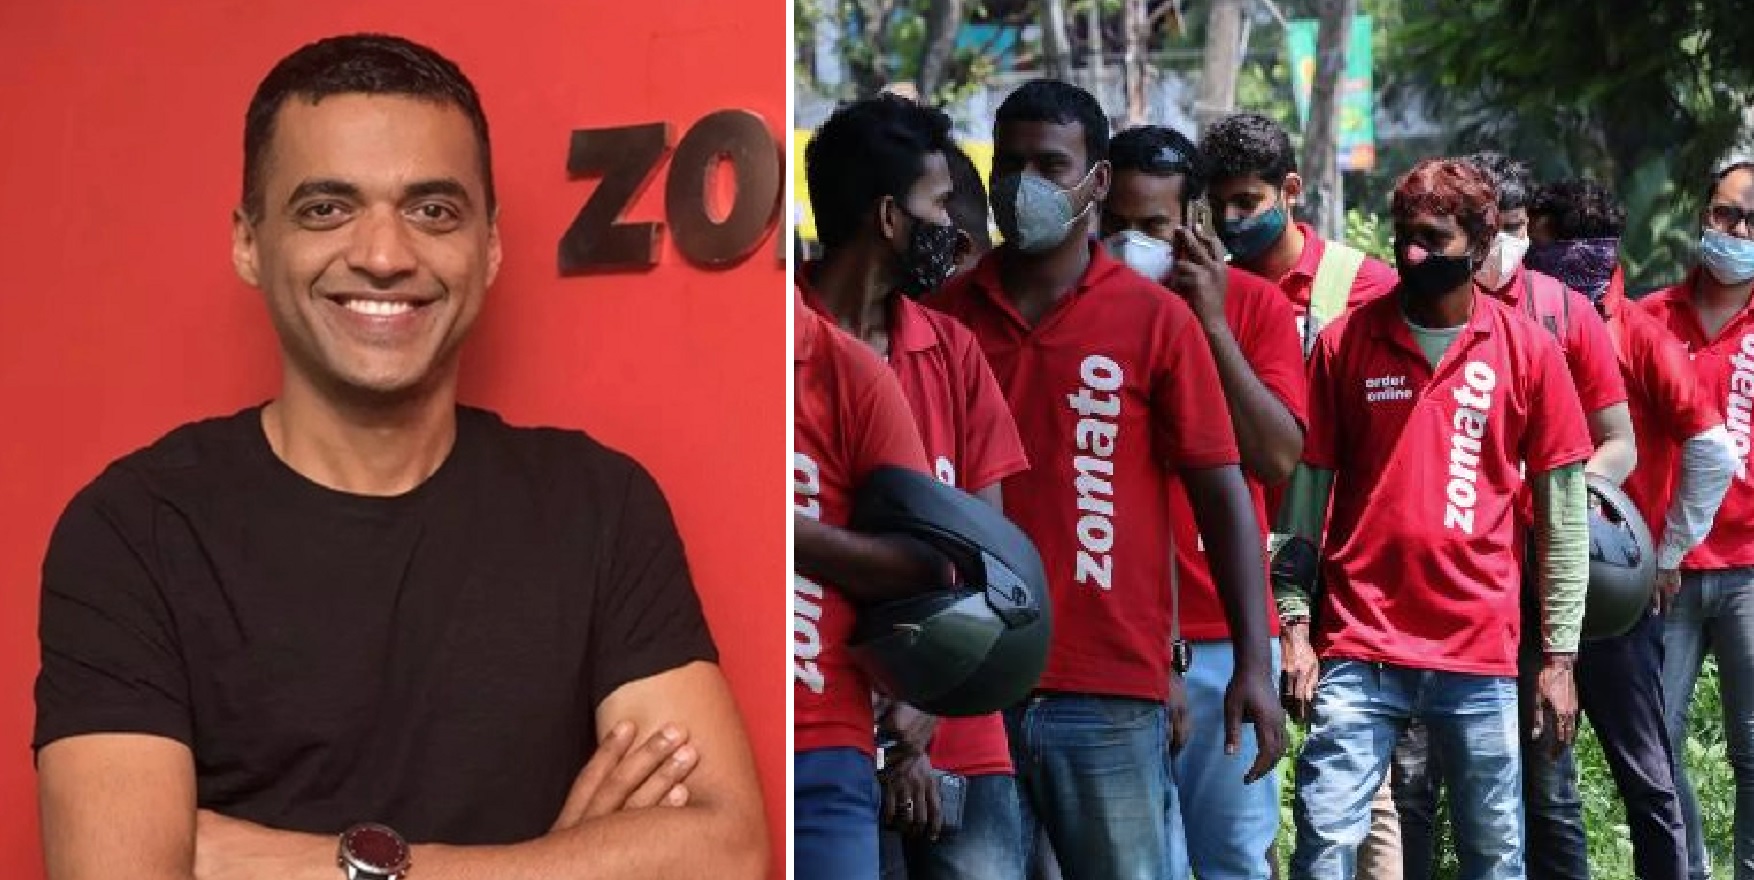 Zomato CEO Deepinder Goyal Pledges Rs 700 Crore Towards Education Of Children Of Delivery Partners